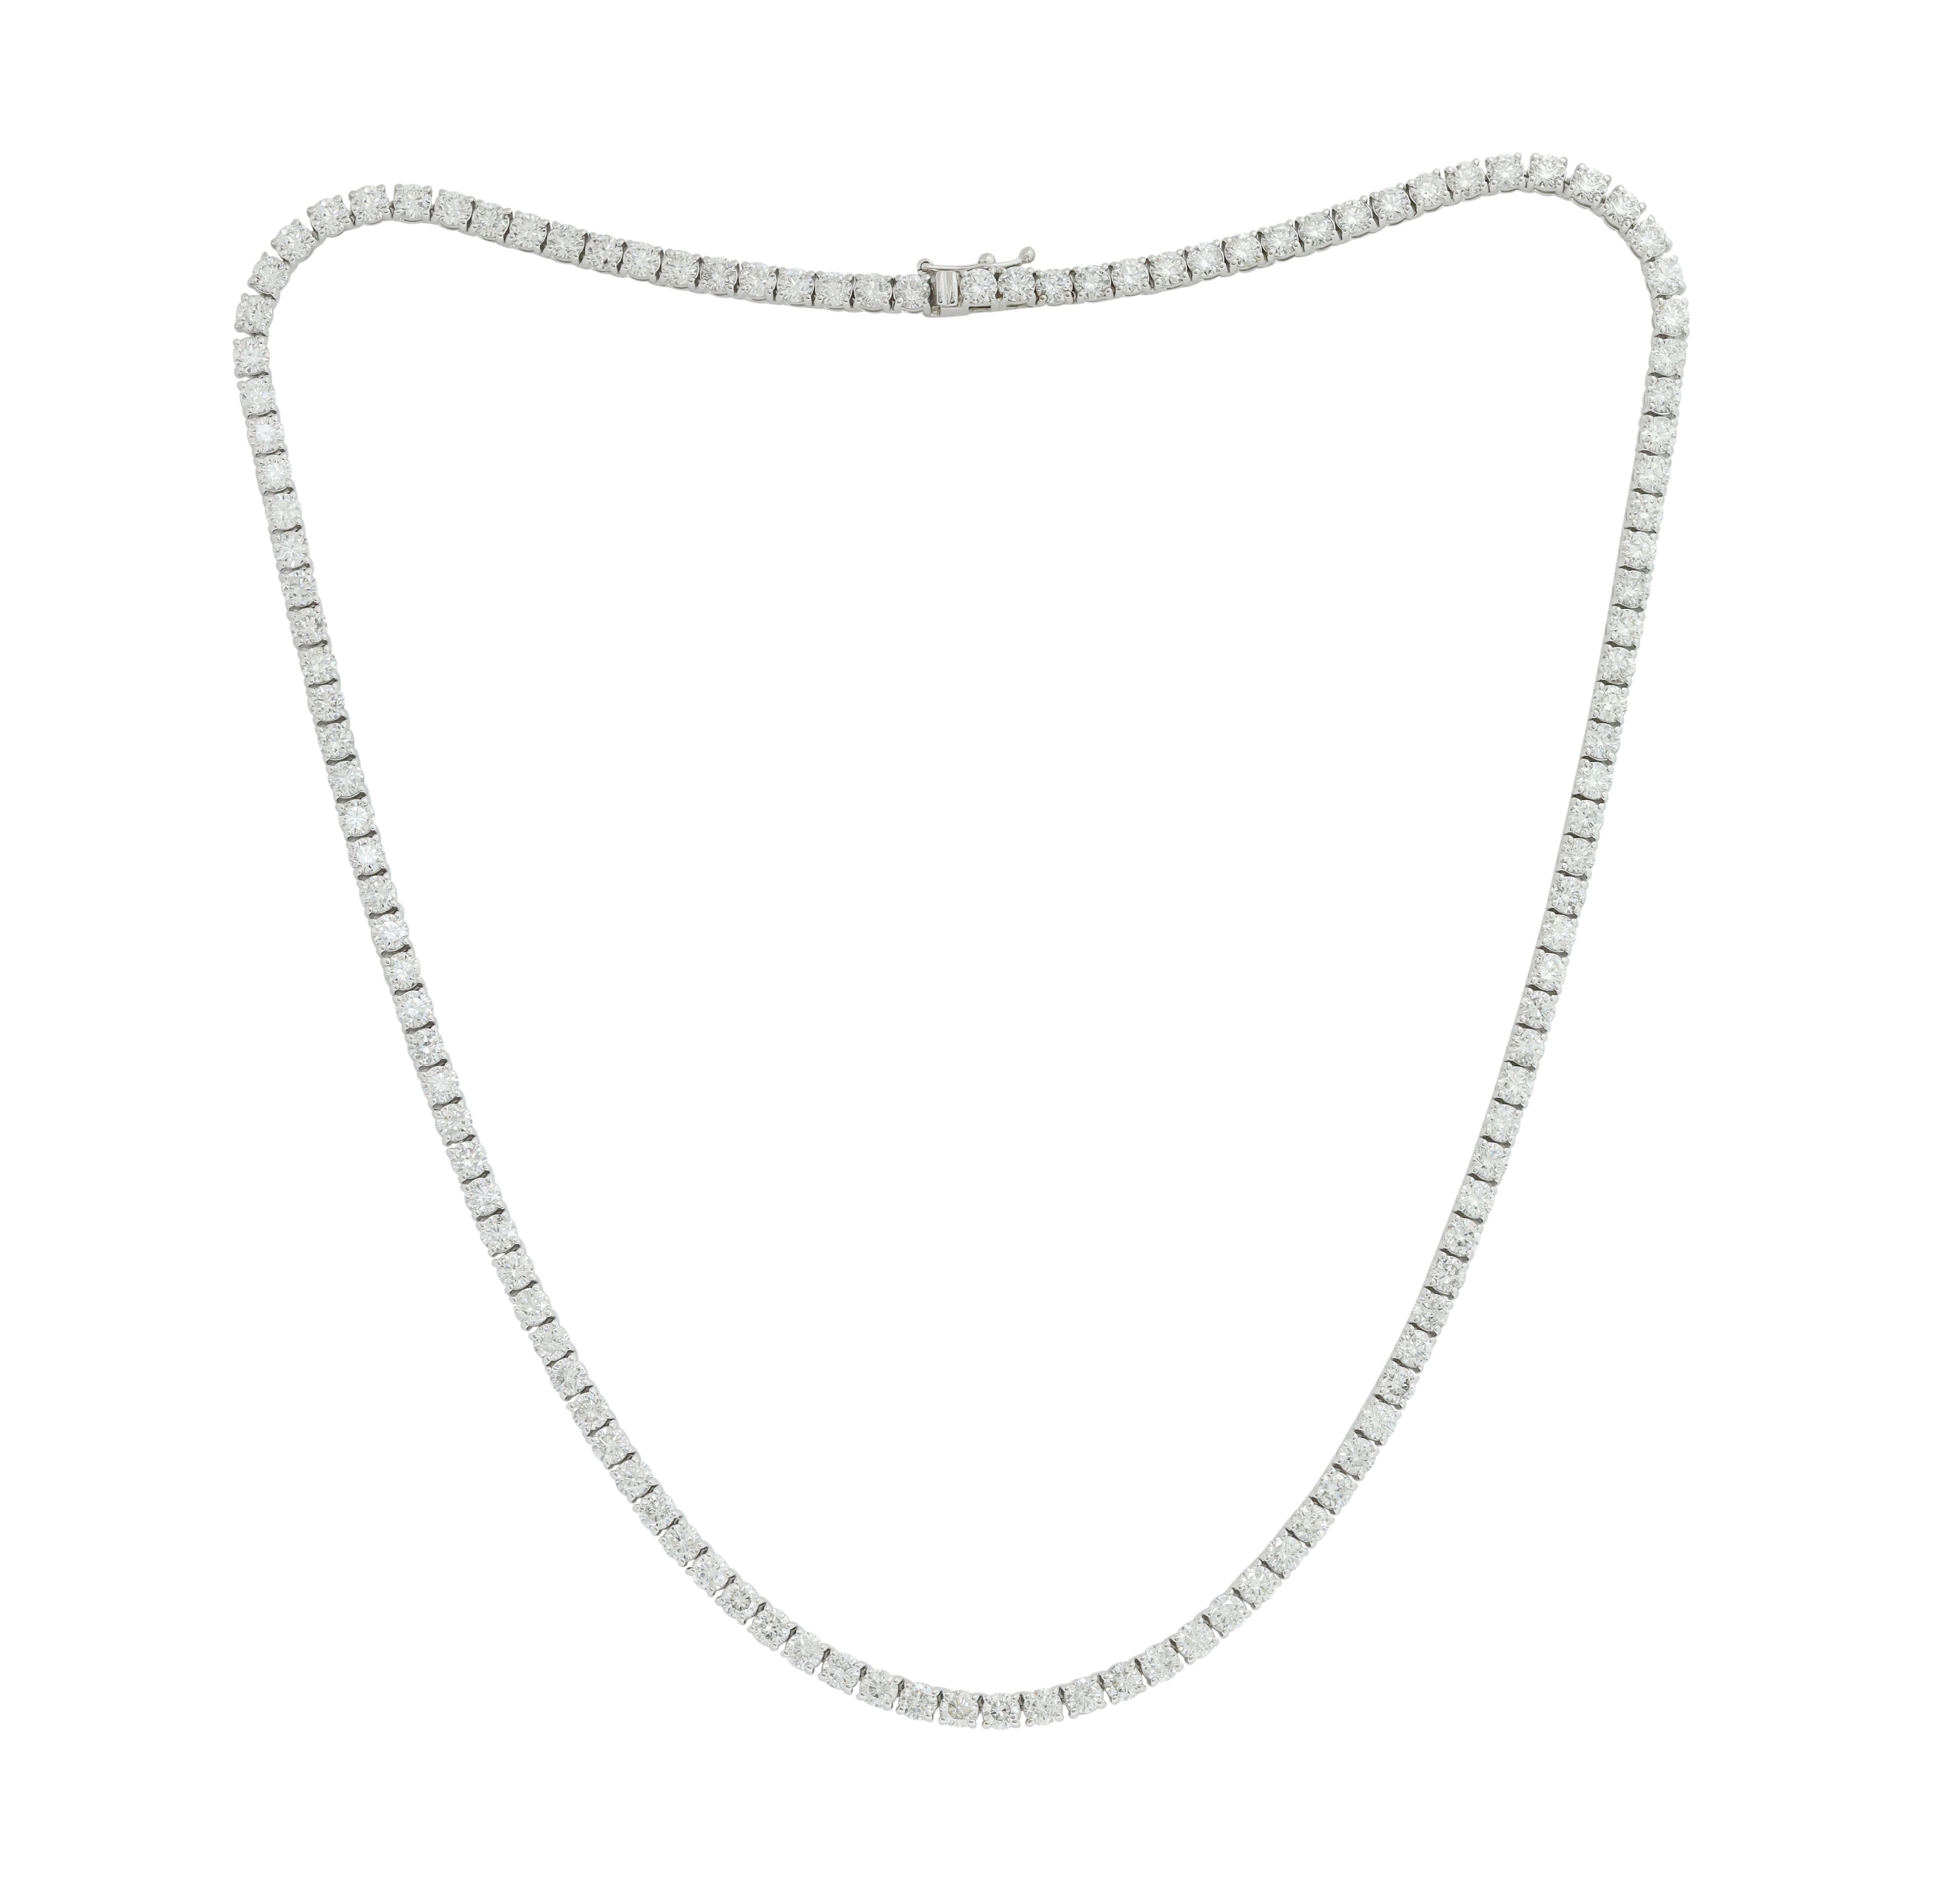 14K White Gold Diamond Straight Line Tennis Necklace Features 12.90Cts of Diamonds, 144St. Diana M. is a leading supplier of top-quality fine jewelry for over 35 years.
Diana M is one-stop shop for all your jewelry shopping, carrying line of diamond